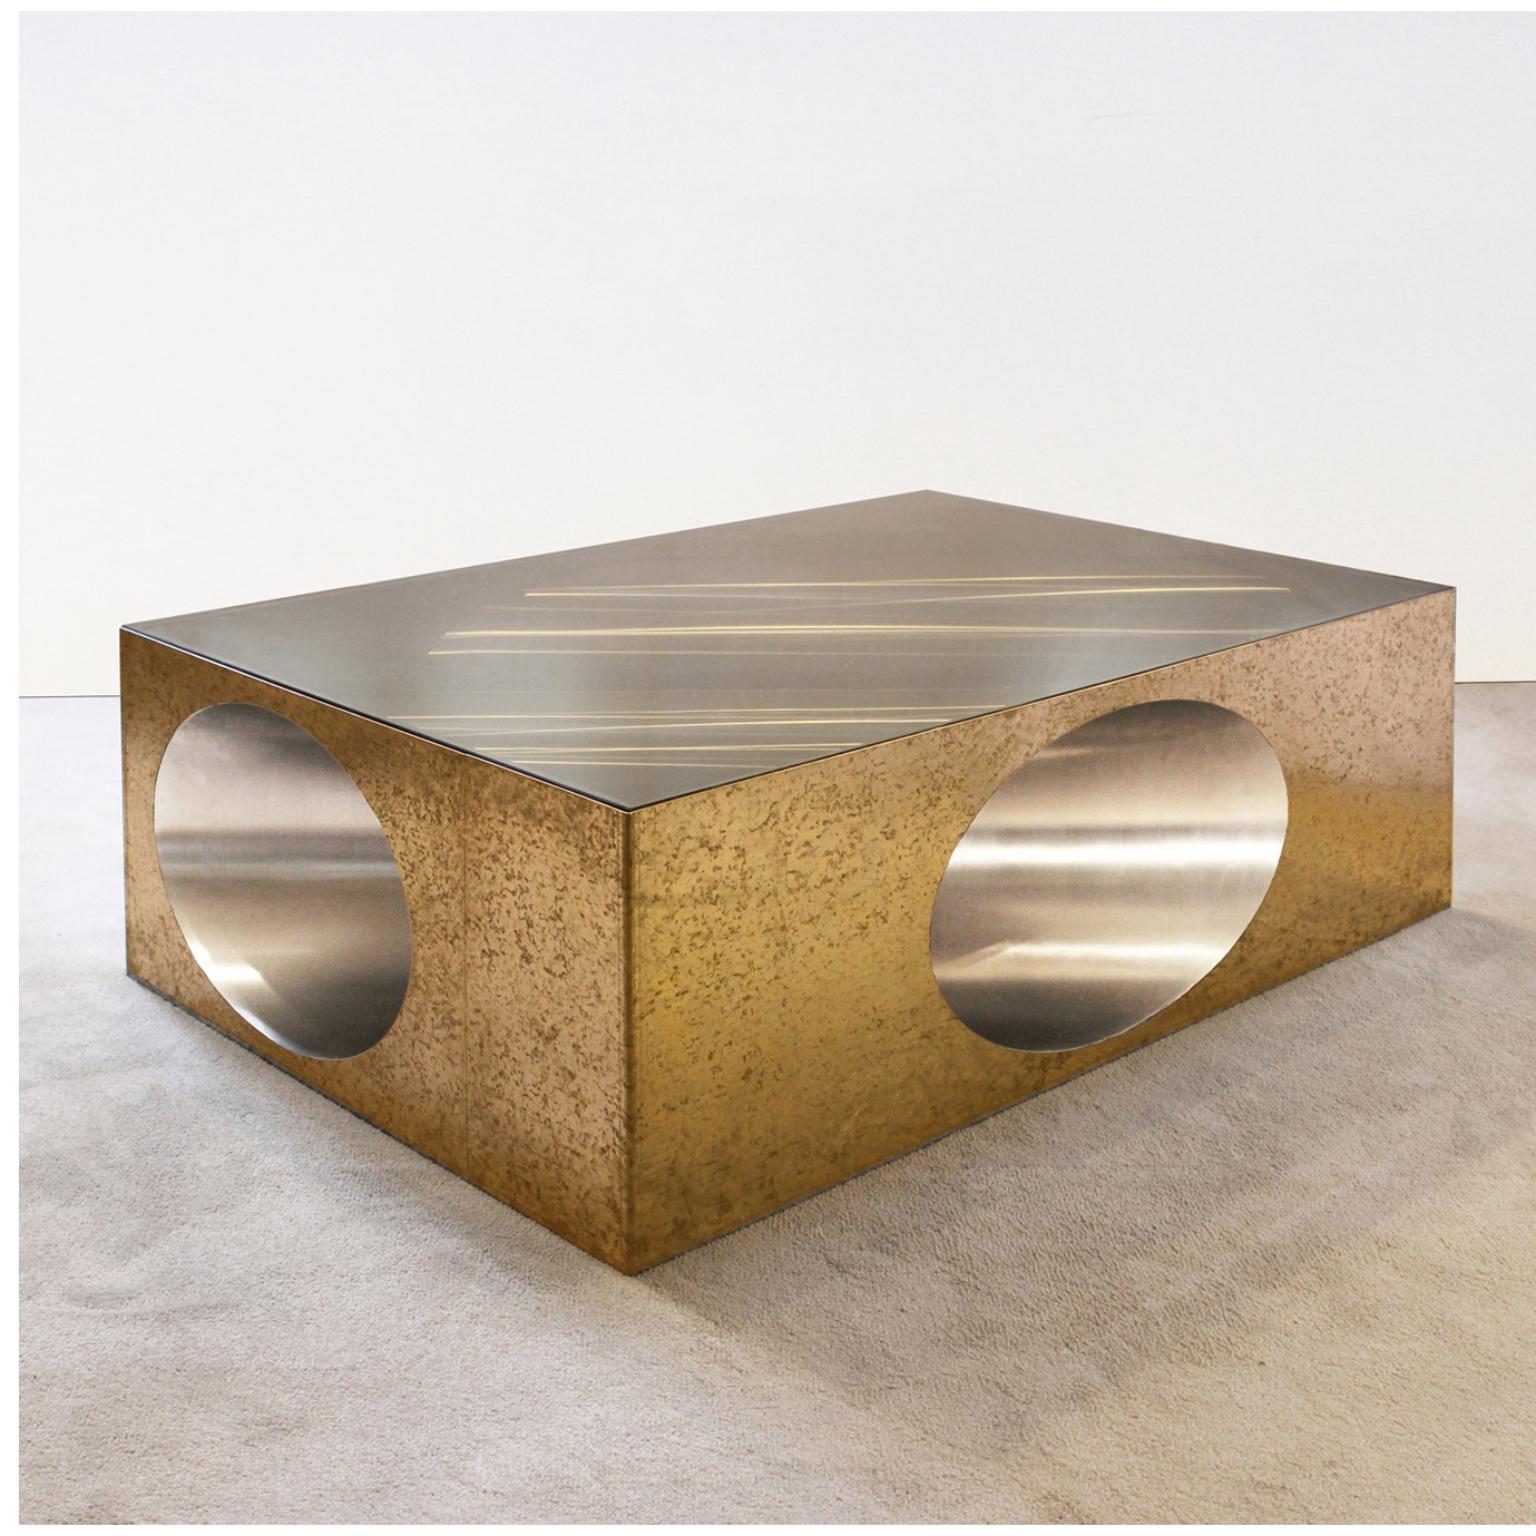 Hol-low table by Christian Zahr
Dimensions: W 120 x D 80 x H 40 cm
Materials: Brass- Brass tin lined inside- Tainted glass

Each Piece is Handmade.

Christian Zahr studied architecture at the Academie Libanaise des Beaux Arts, Beirut, Lebanon. After